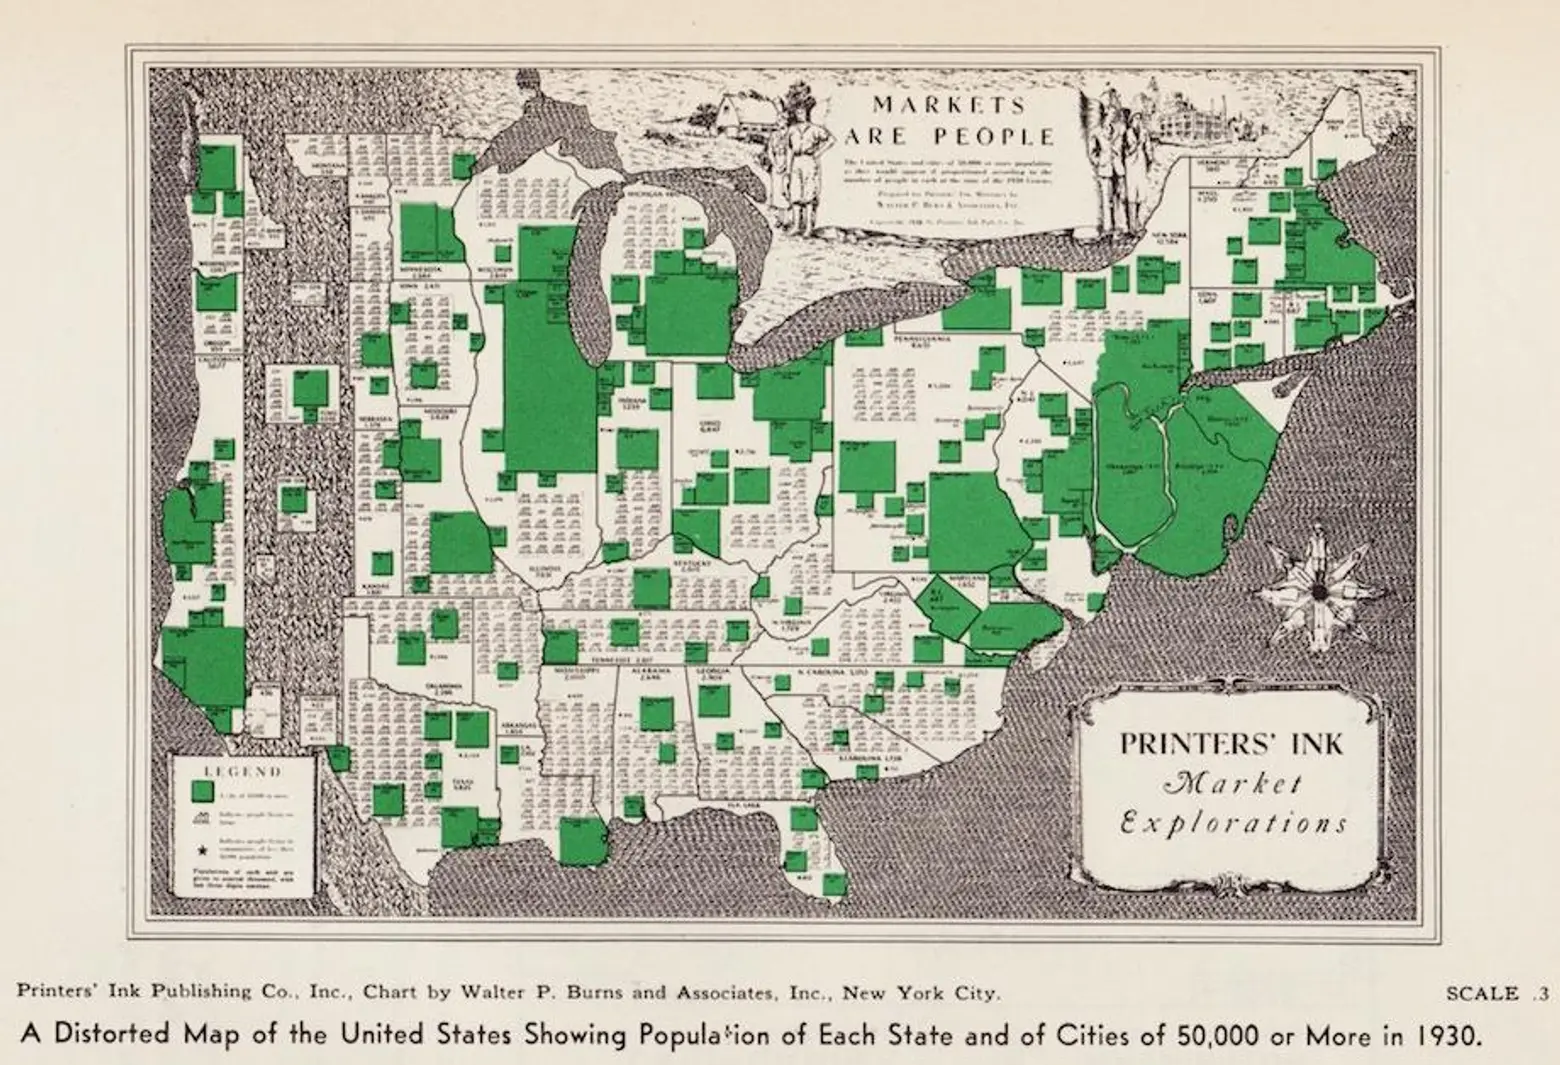 Vintage maps reflect the population distribution of Americans in 1930